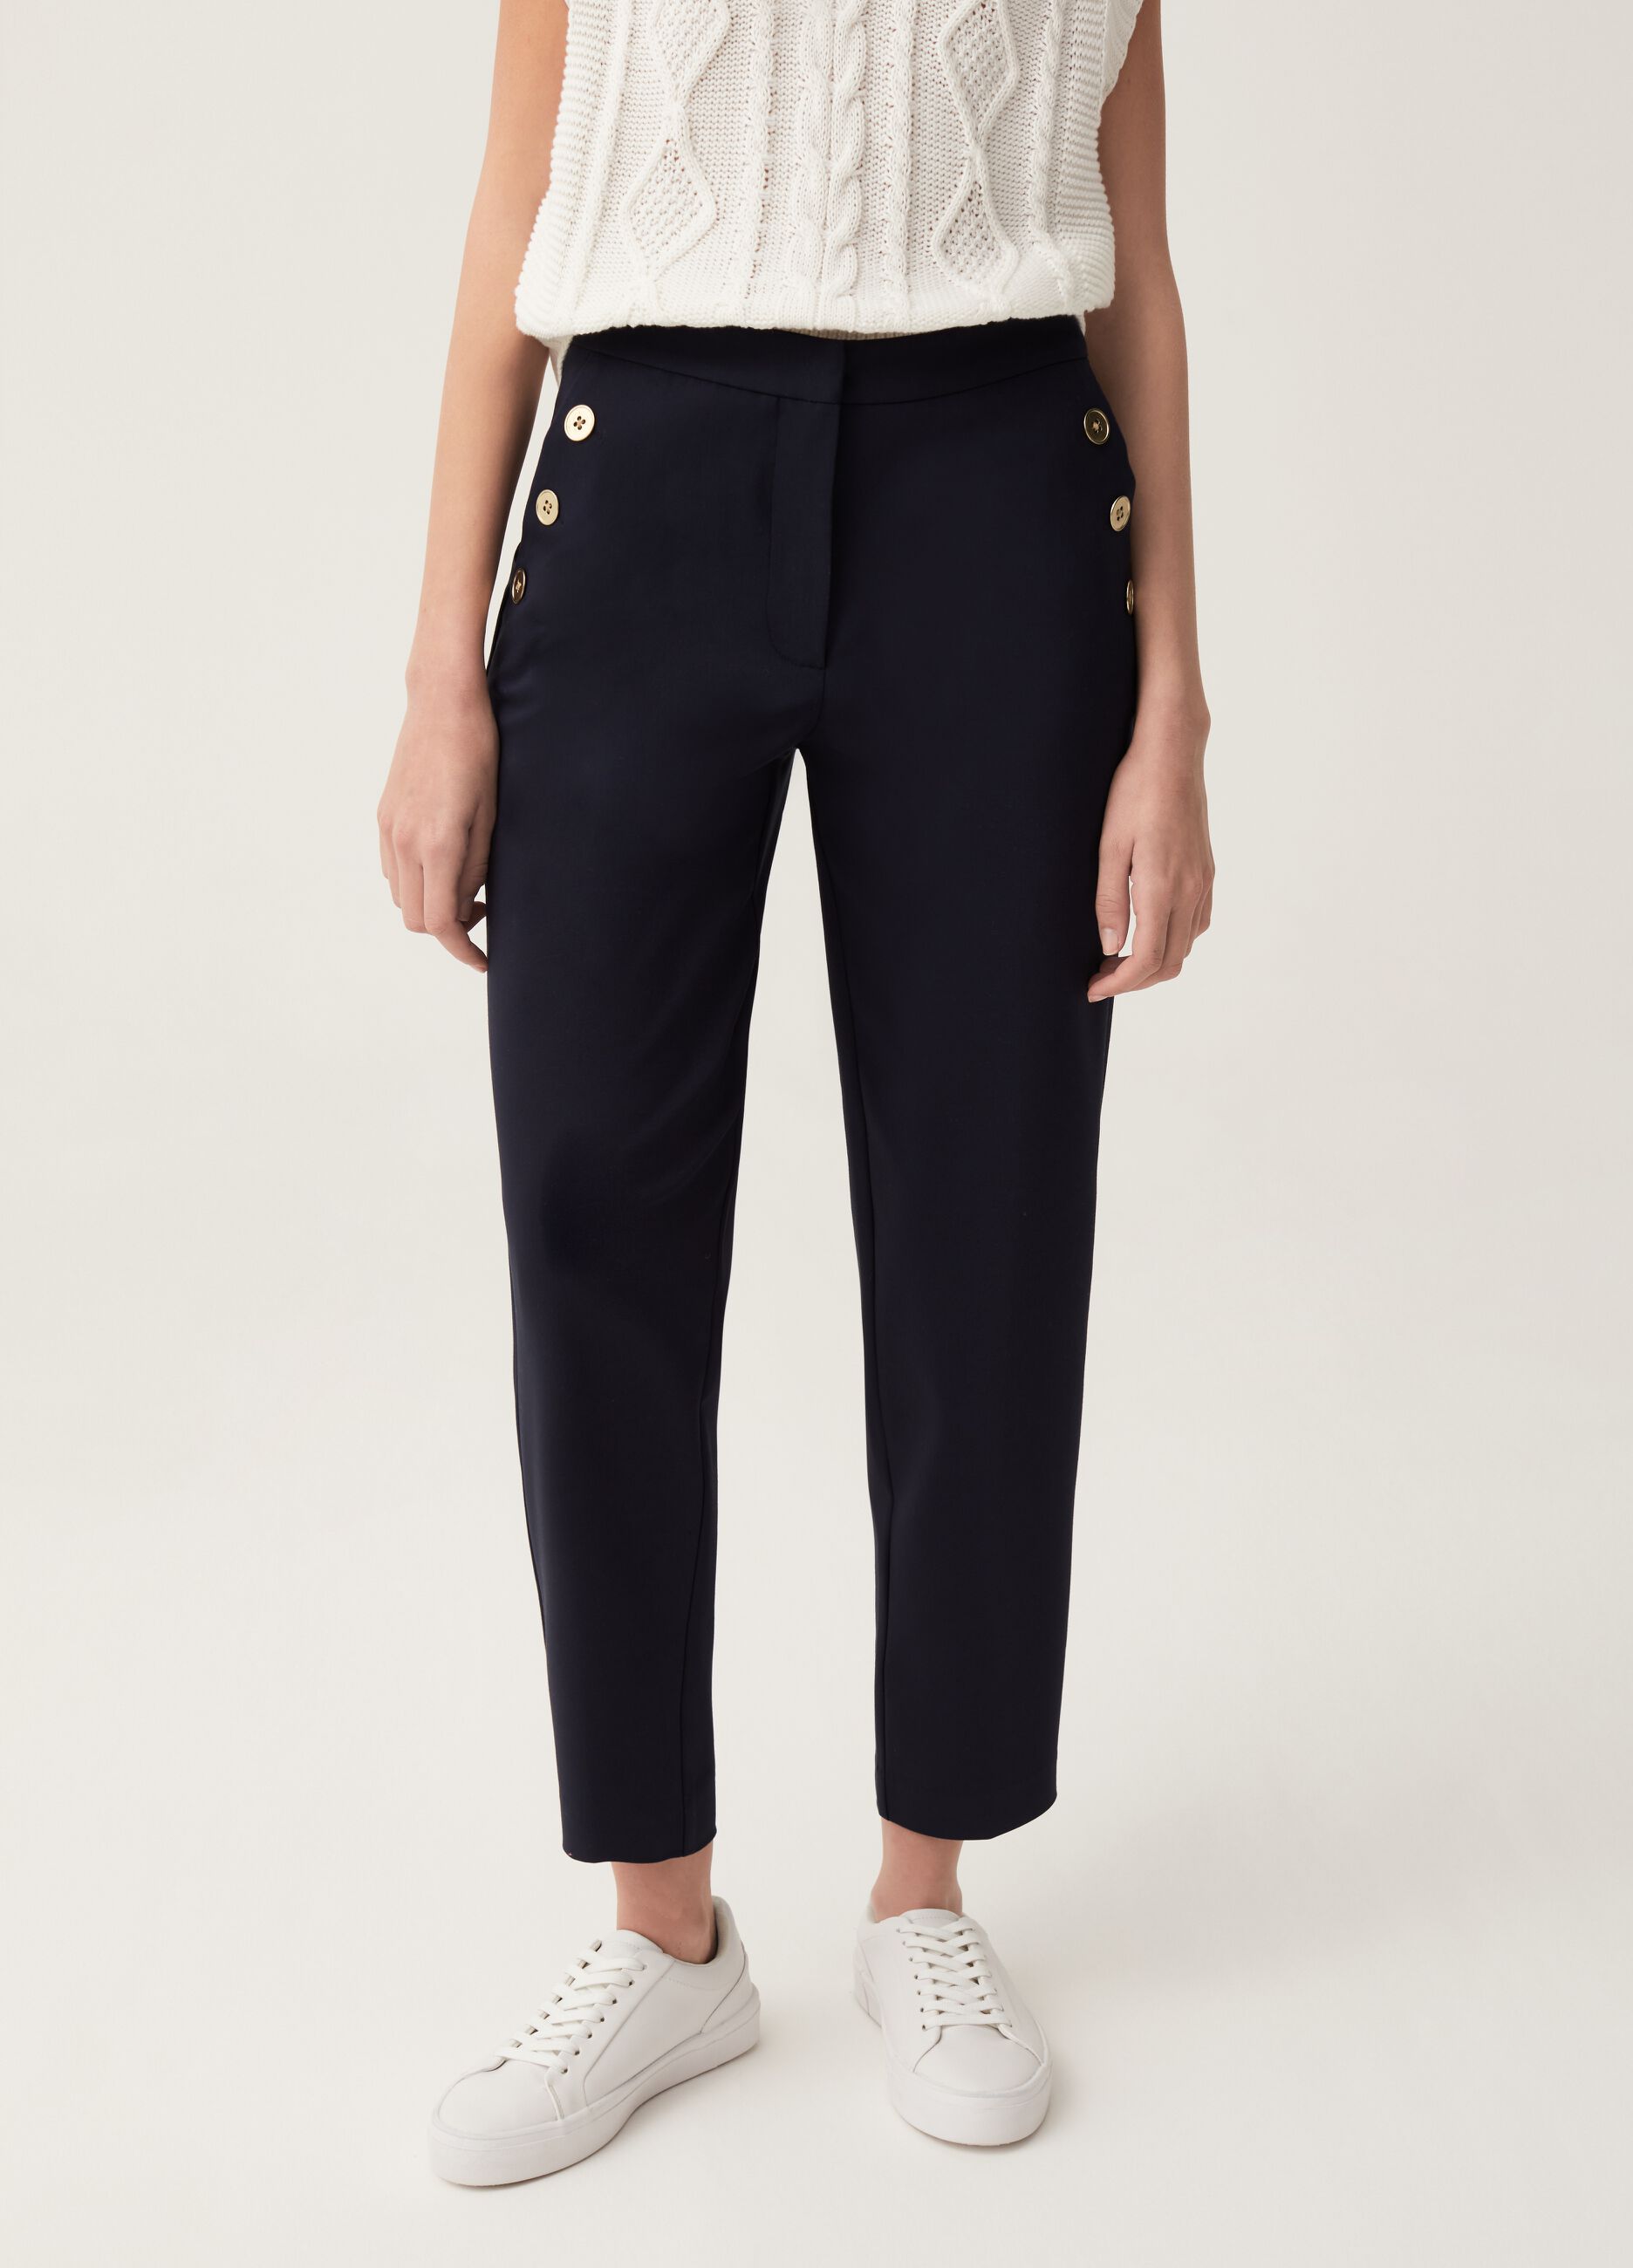 Cigarette trousers with gold-coloured buttons